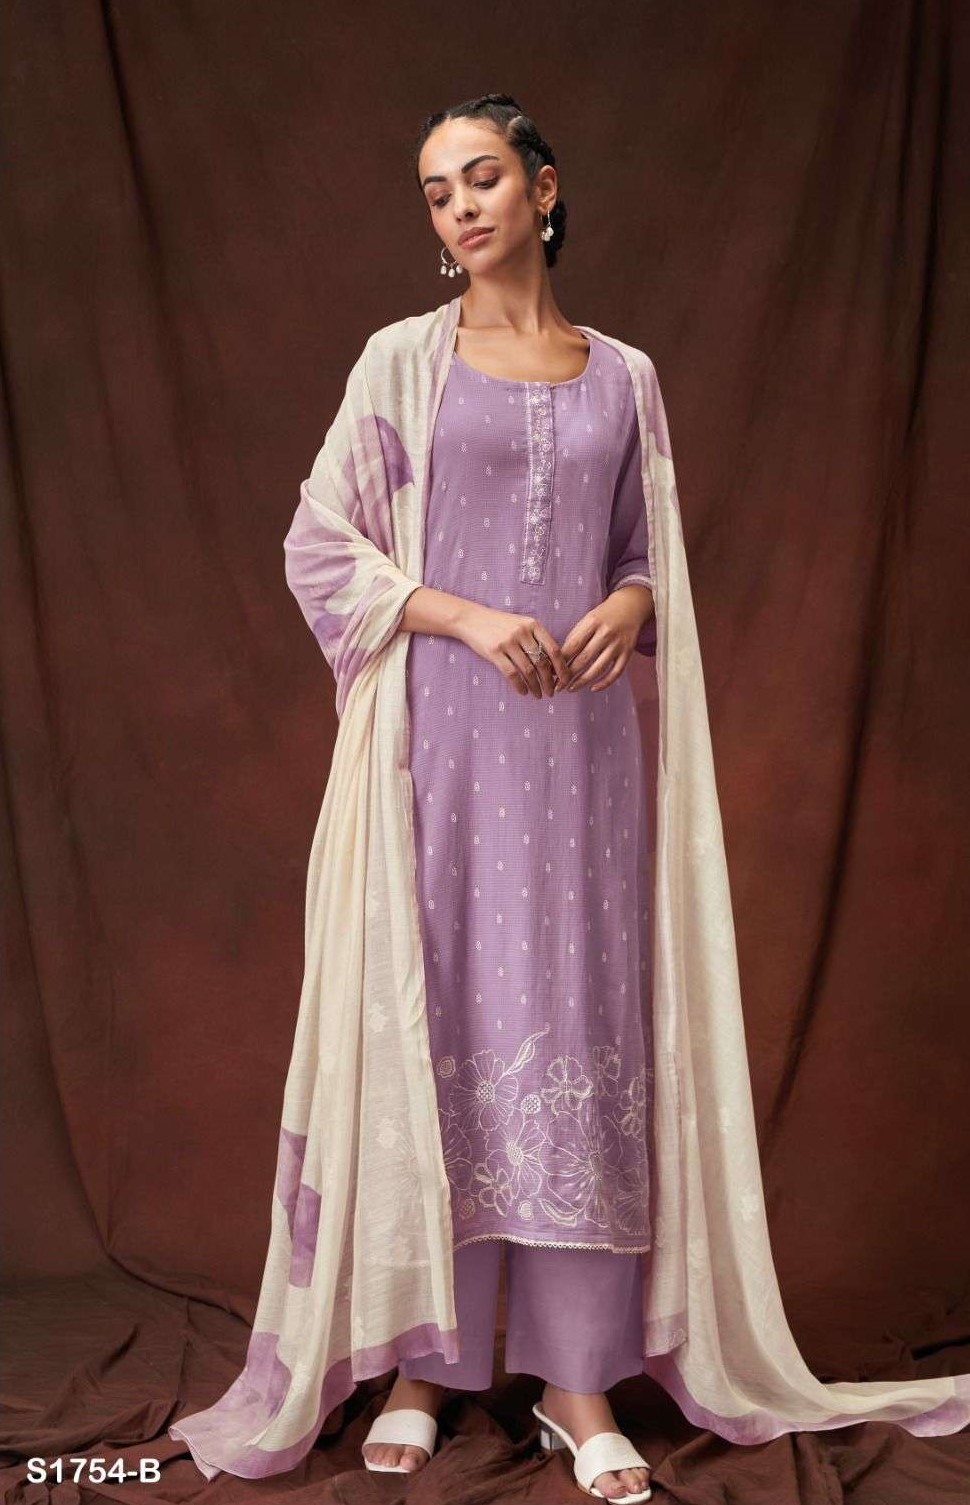 New Purple Colour Pakistani Long Dress Material @ 48% OFF Rs 1359.00 Only  FREE Shipping + Extra Discount - Dress Material, Buy Dress Material Online, Salwar  suit, Desginer Suit, Buy Desginer Suit,